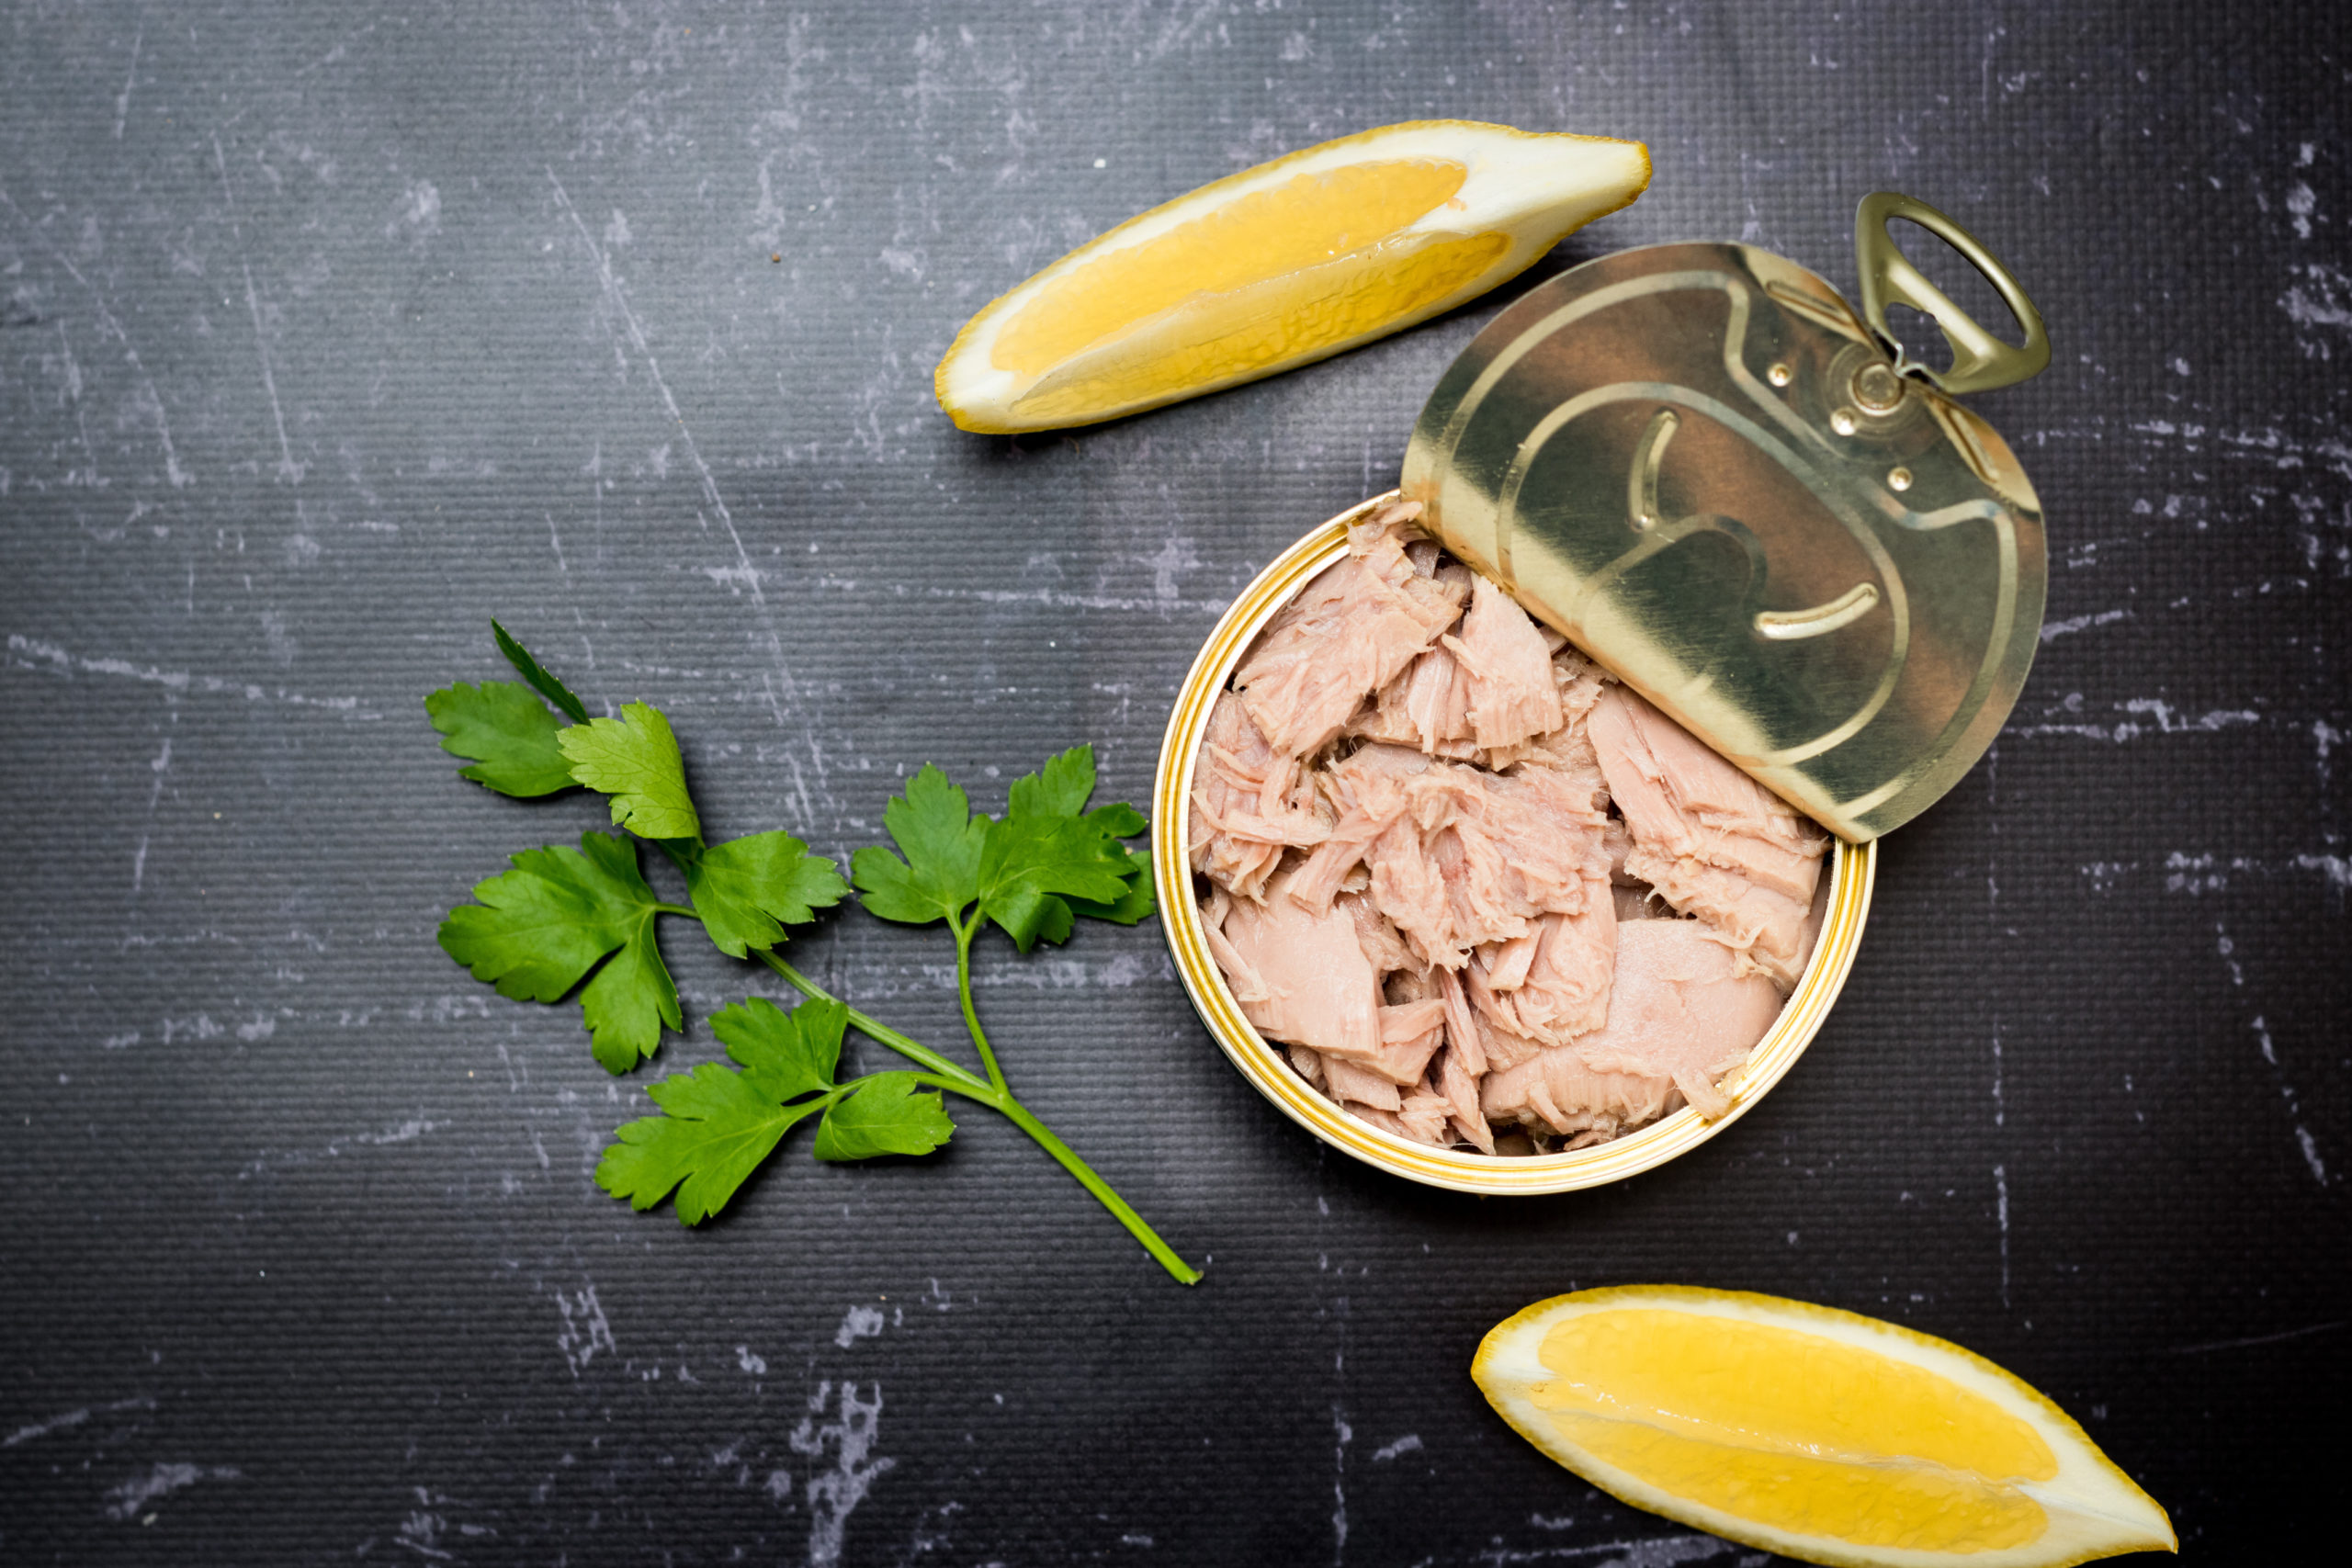 Canned tuna with lemon and parsley on dark background, top view.